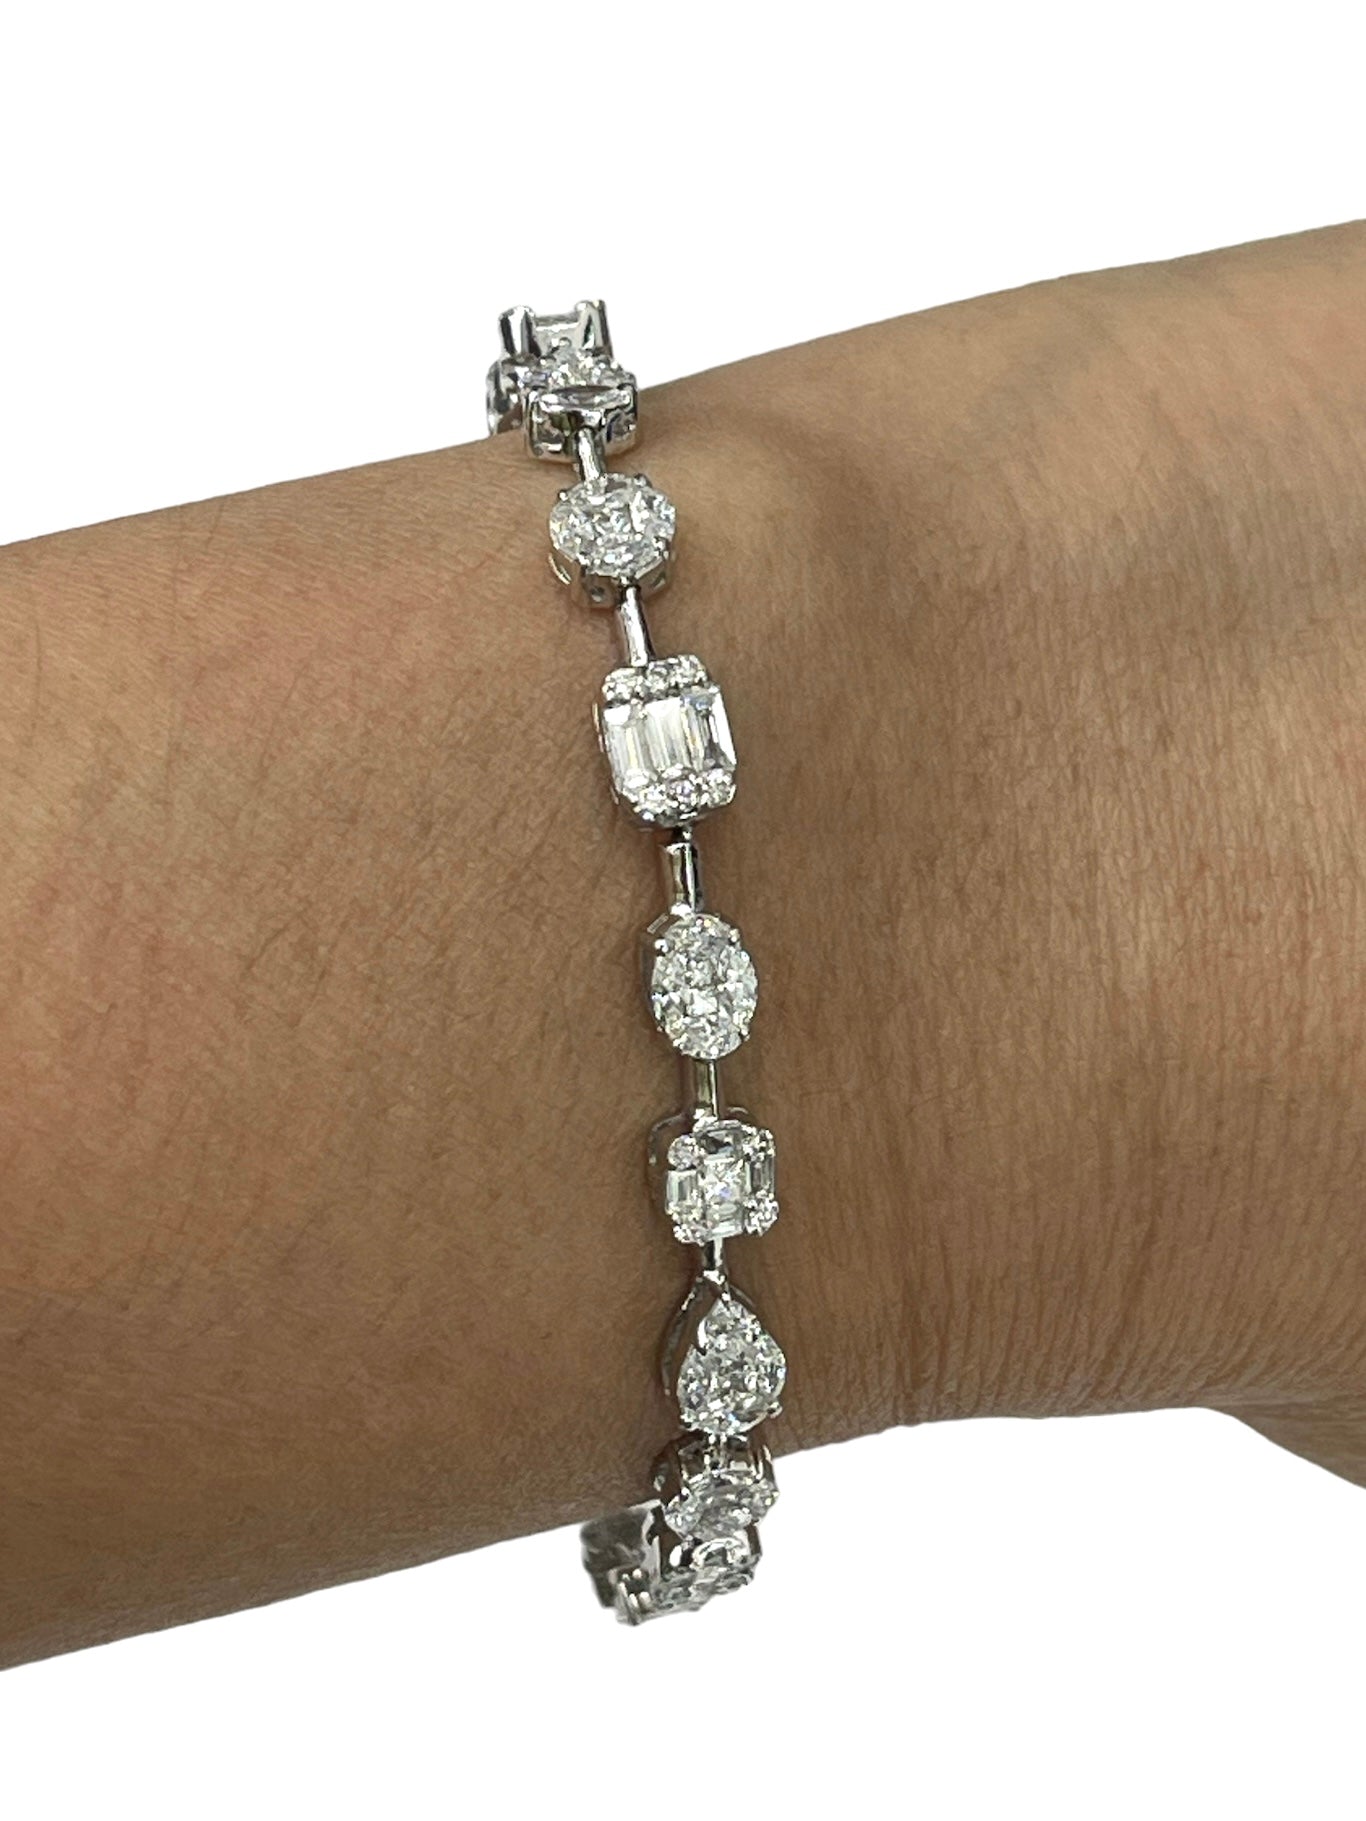 More illusion diamonds 💎 This pear illusion diamond tennis bracelet is the  show- stopping piece you have been searching for! 🤩 | Instagram